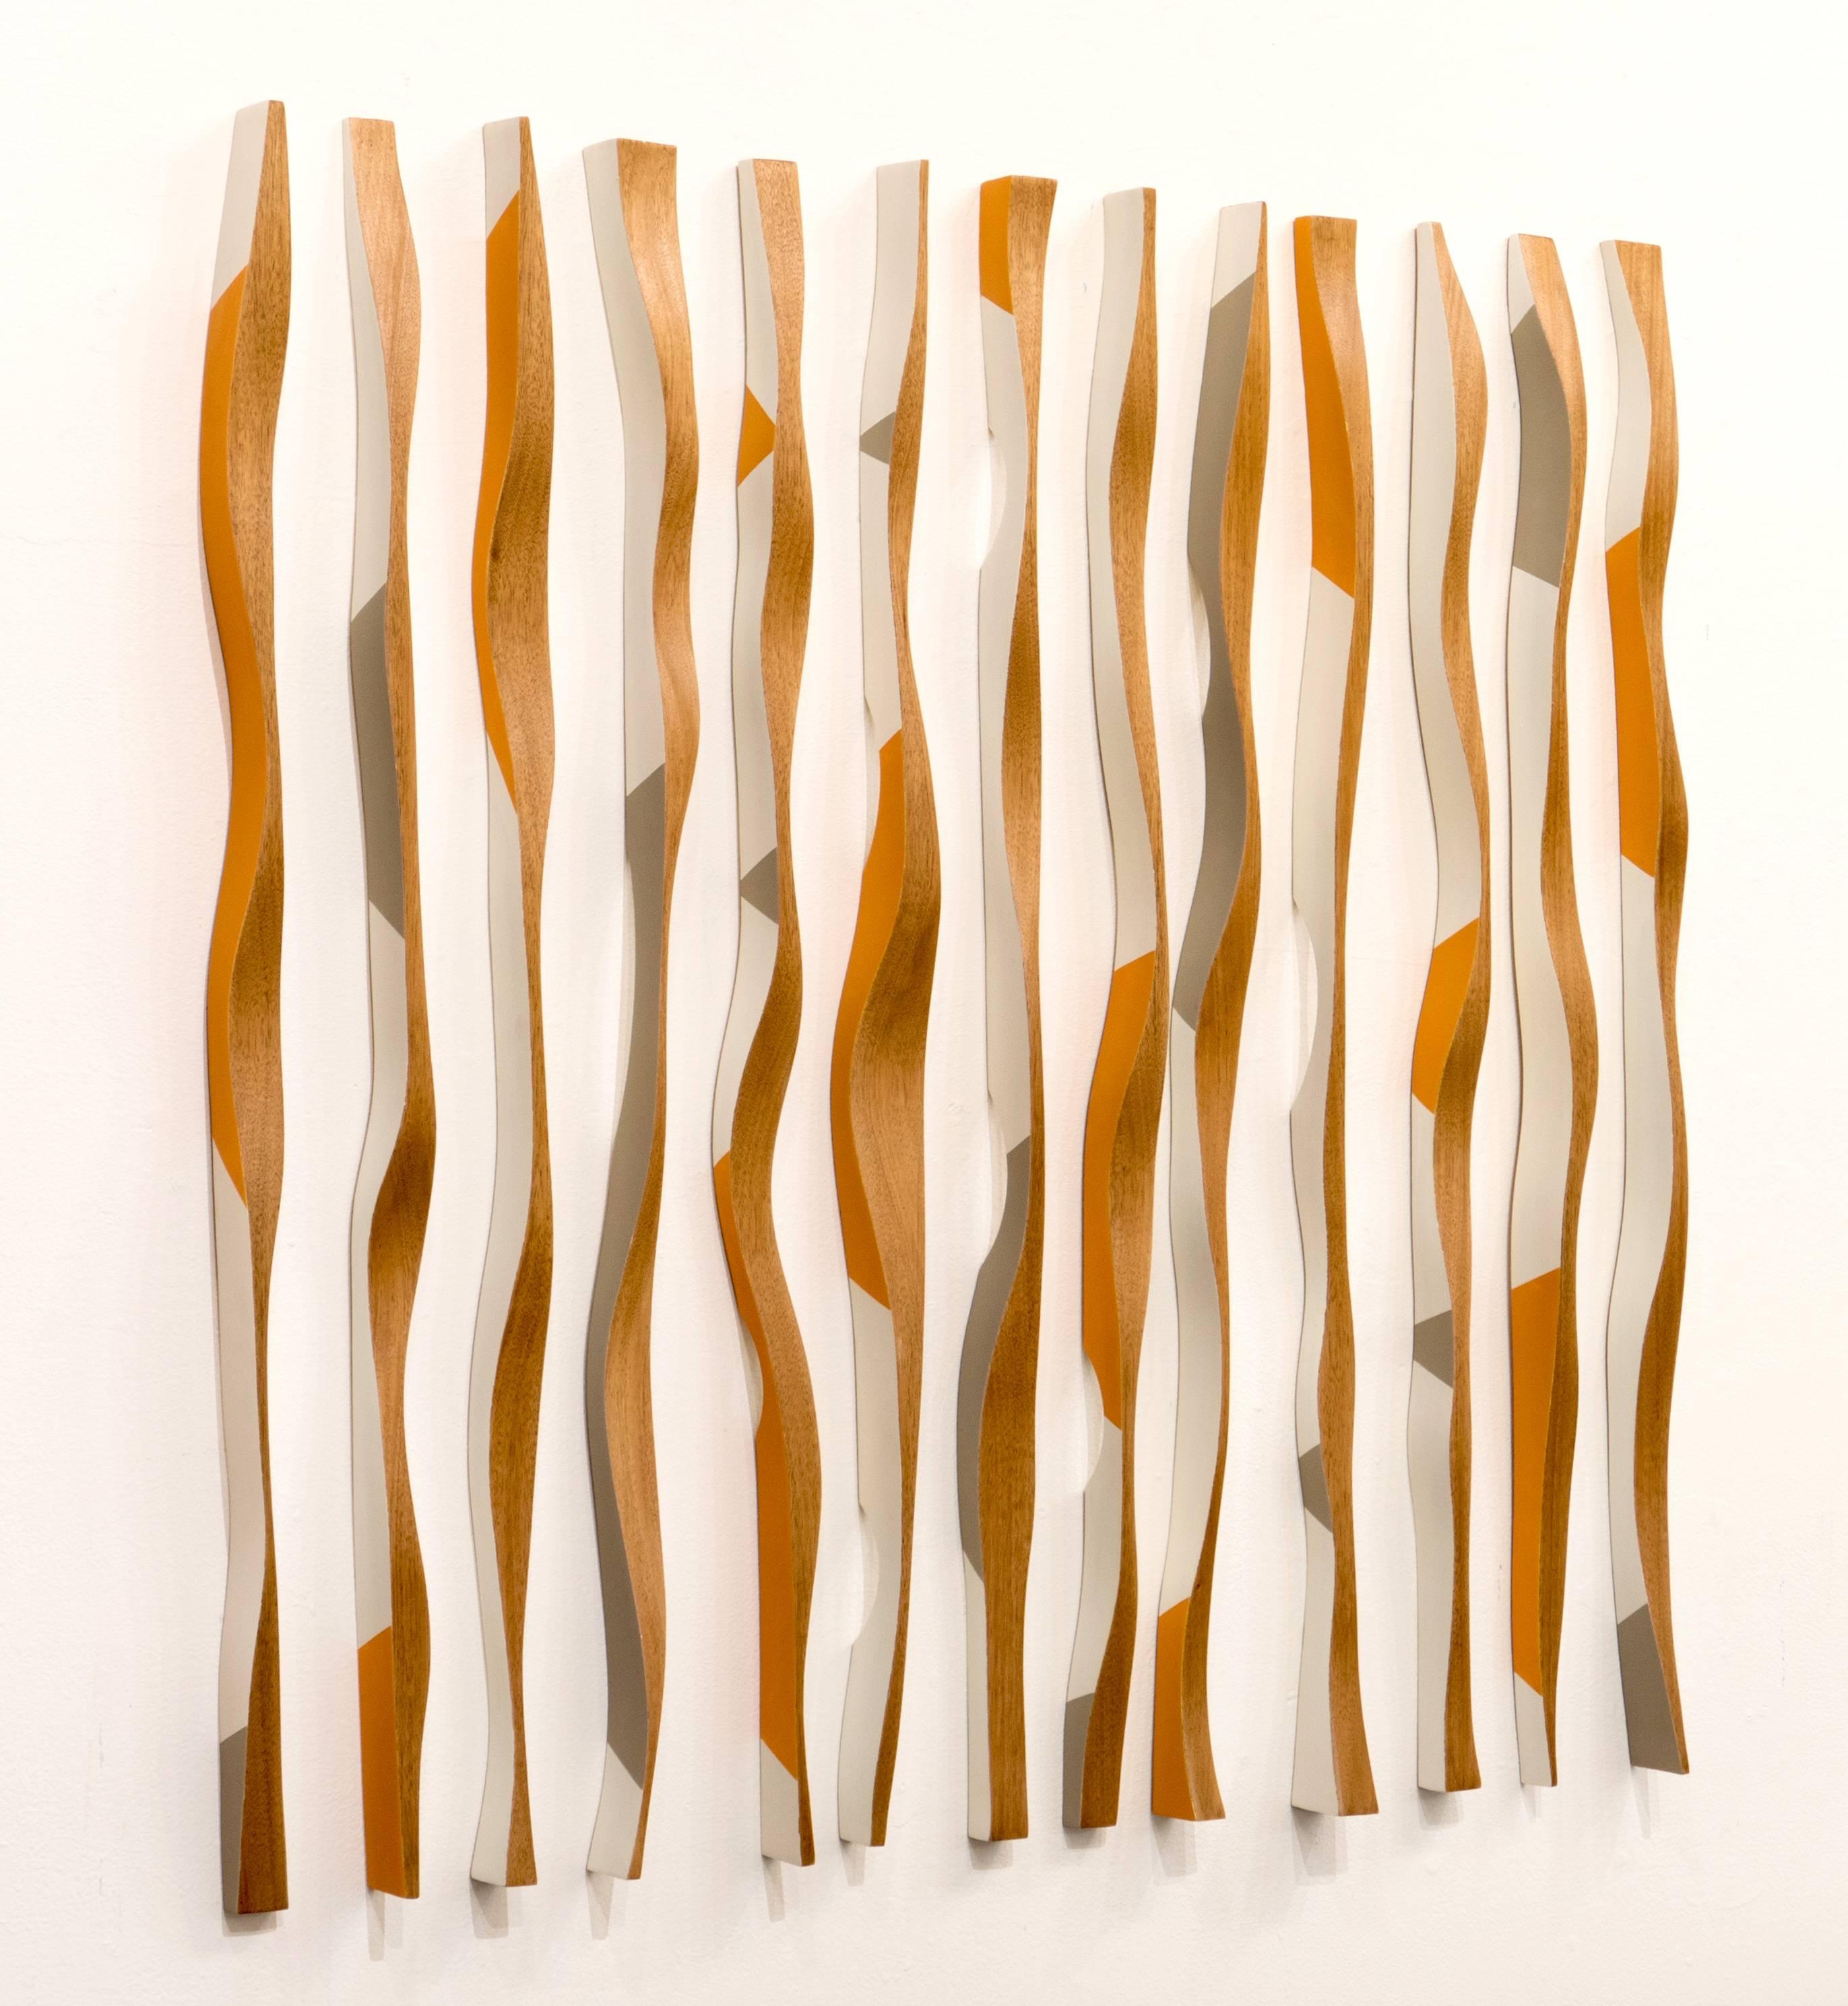 Mahogany installation  images showing: left side, right side, face view and how a similar piece is installed on the wall   

Pascal creates an extraordinary range of abstract meditations that seem to arise directly from the medium itself, rather